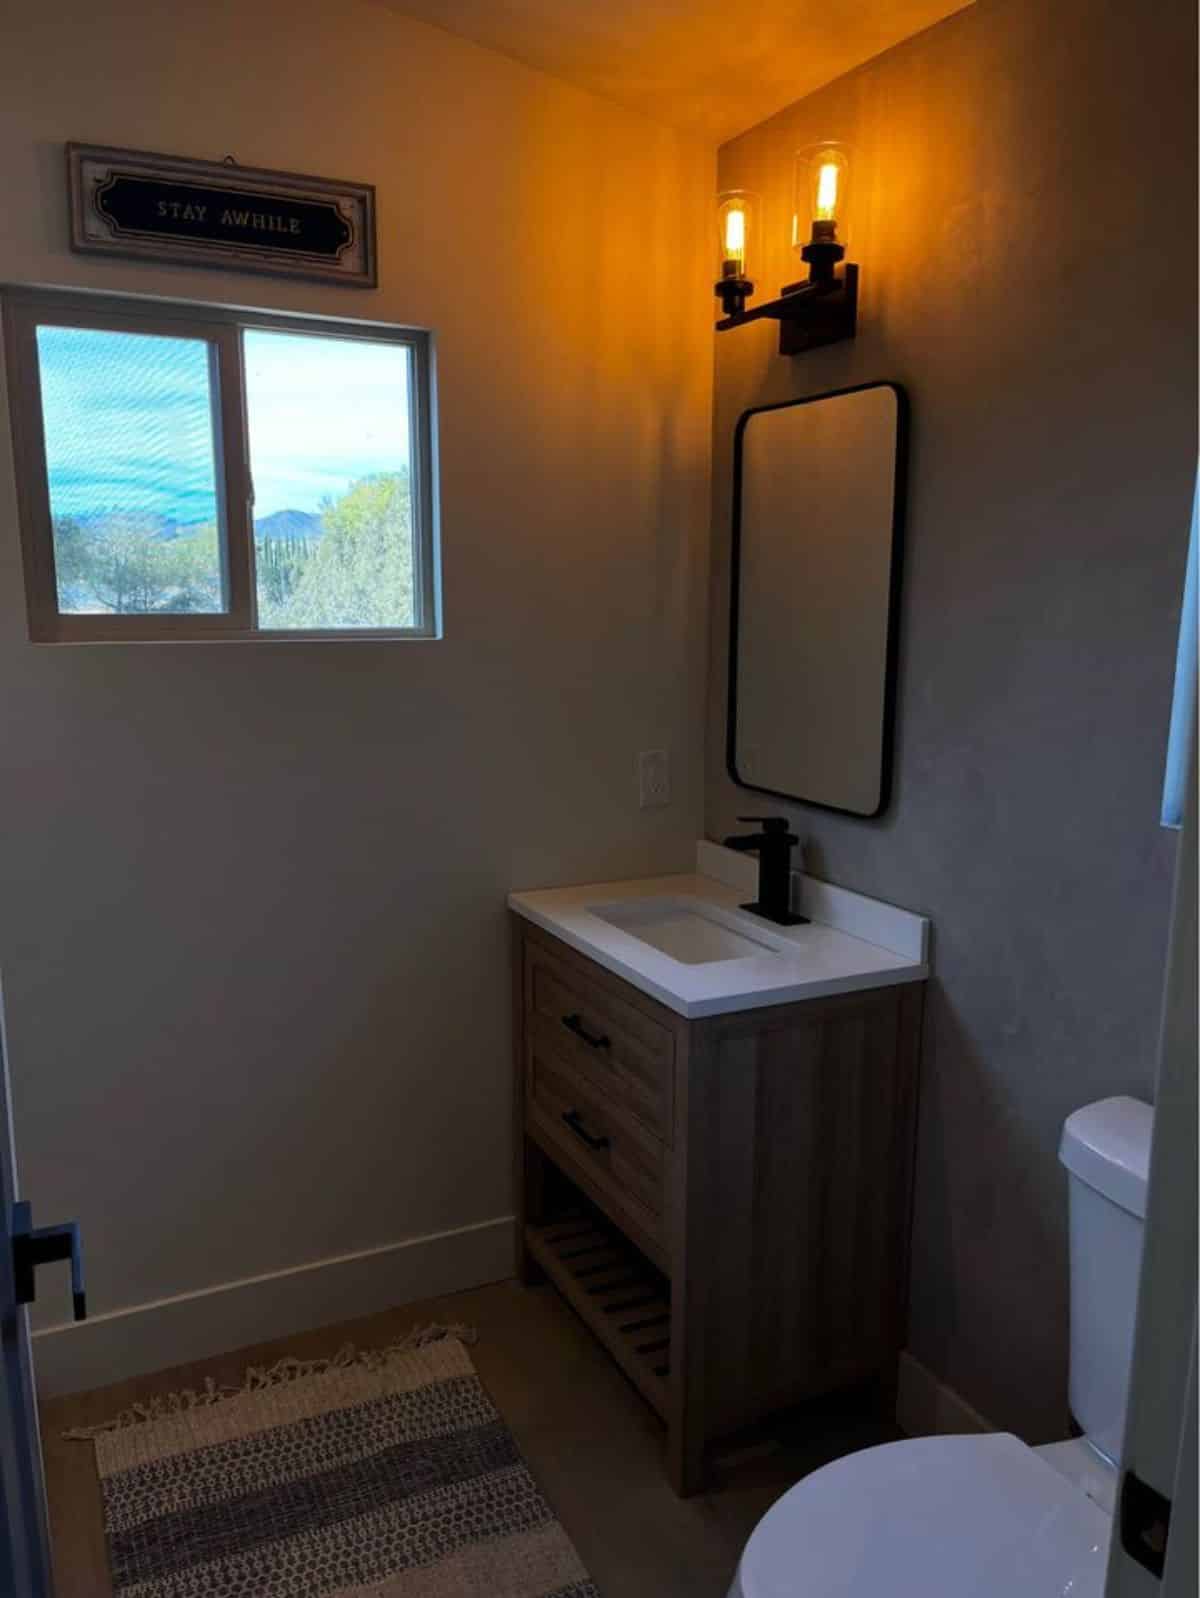 Bathroom of exquisite tiny home has all the standard fittings